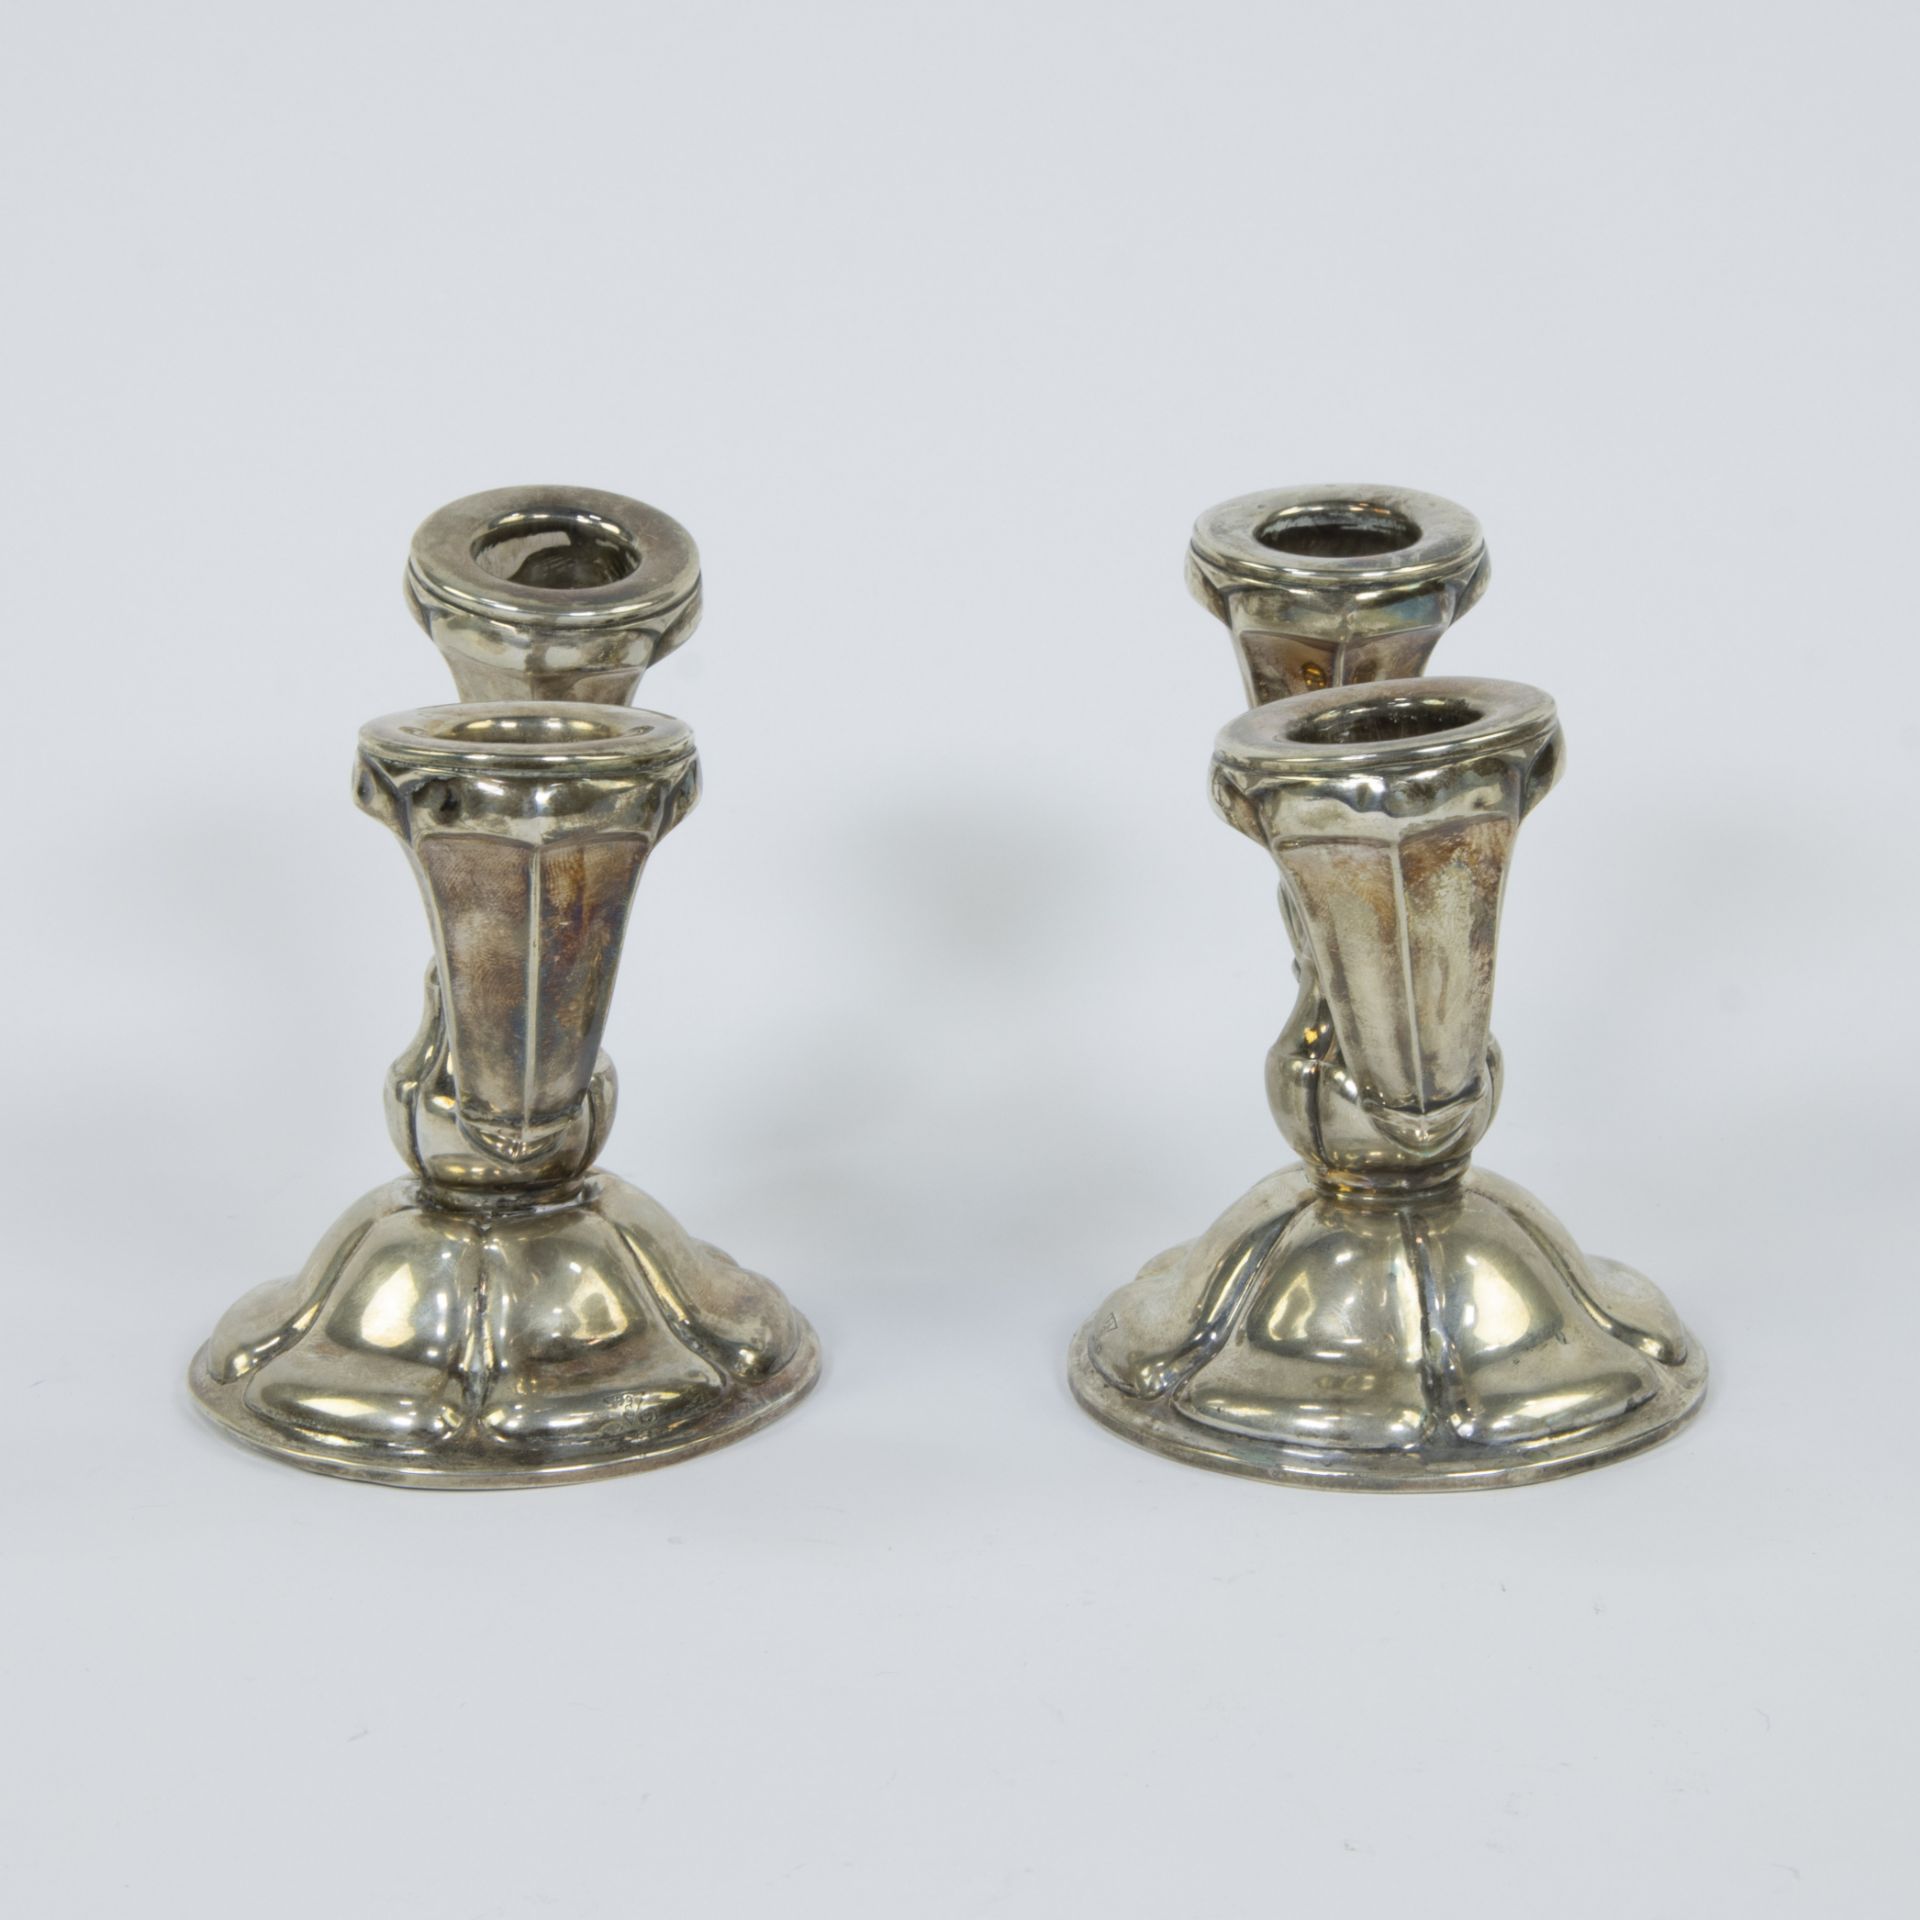 Silver lot, tray (Elite racing 1973) silver 925 and pair of candlesticks silver 830 - Image 3 of 7